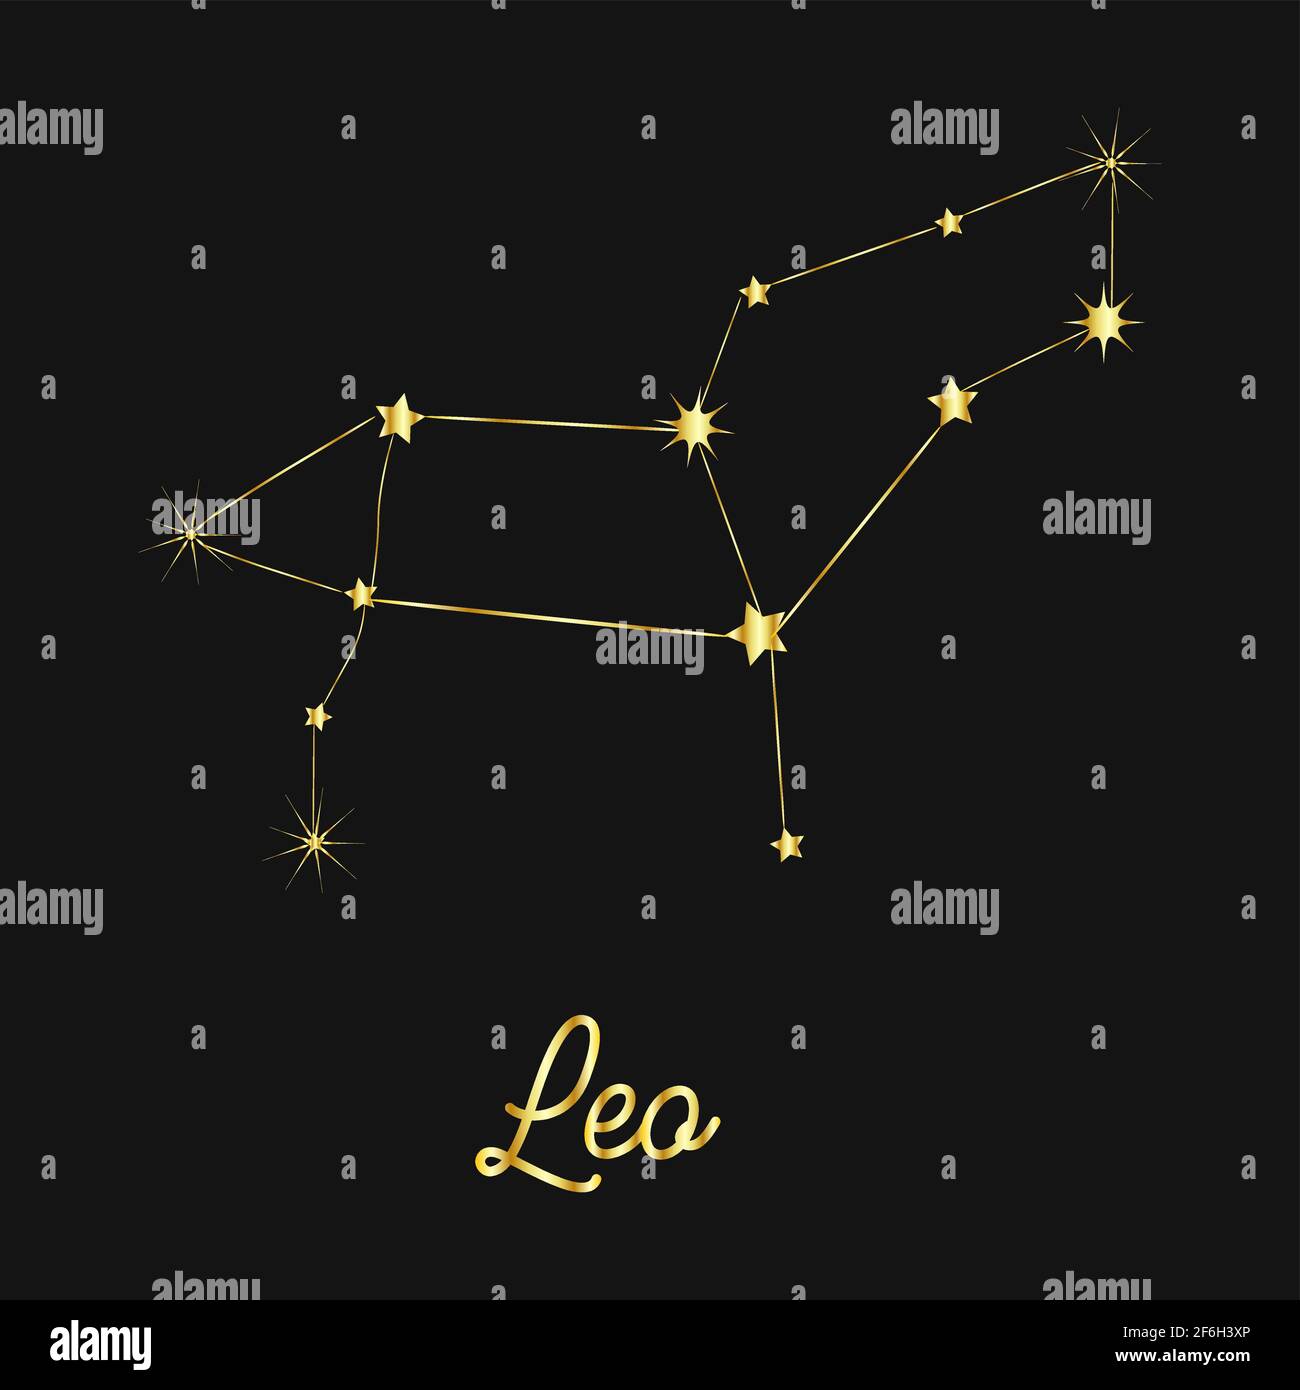 Zodiac sign in the form of a golden constellation in the sky. Stars and lines. Stock Vector